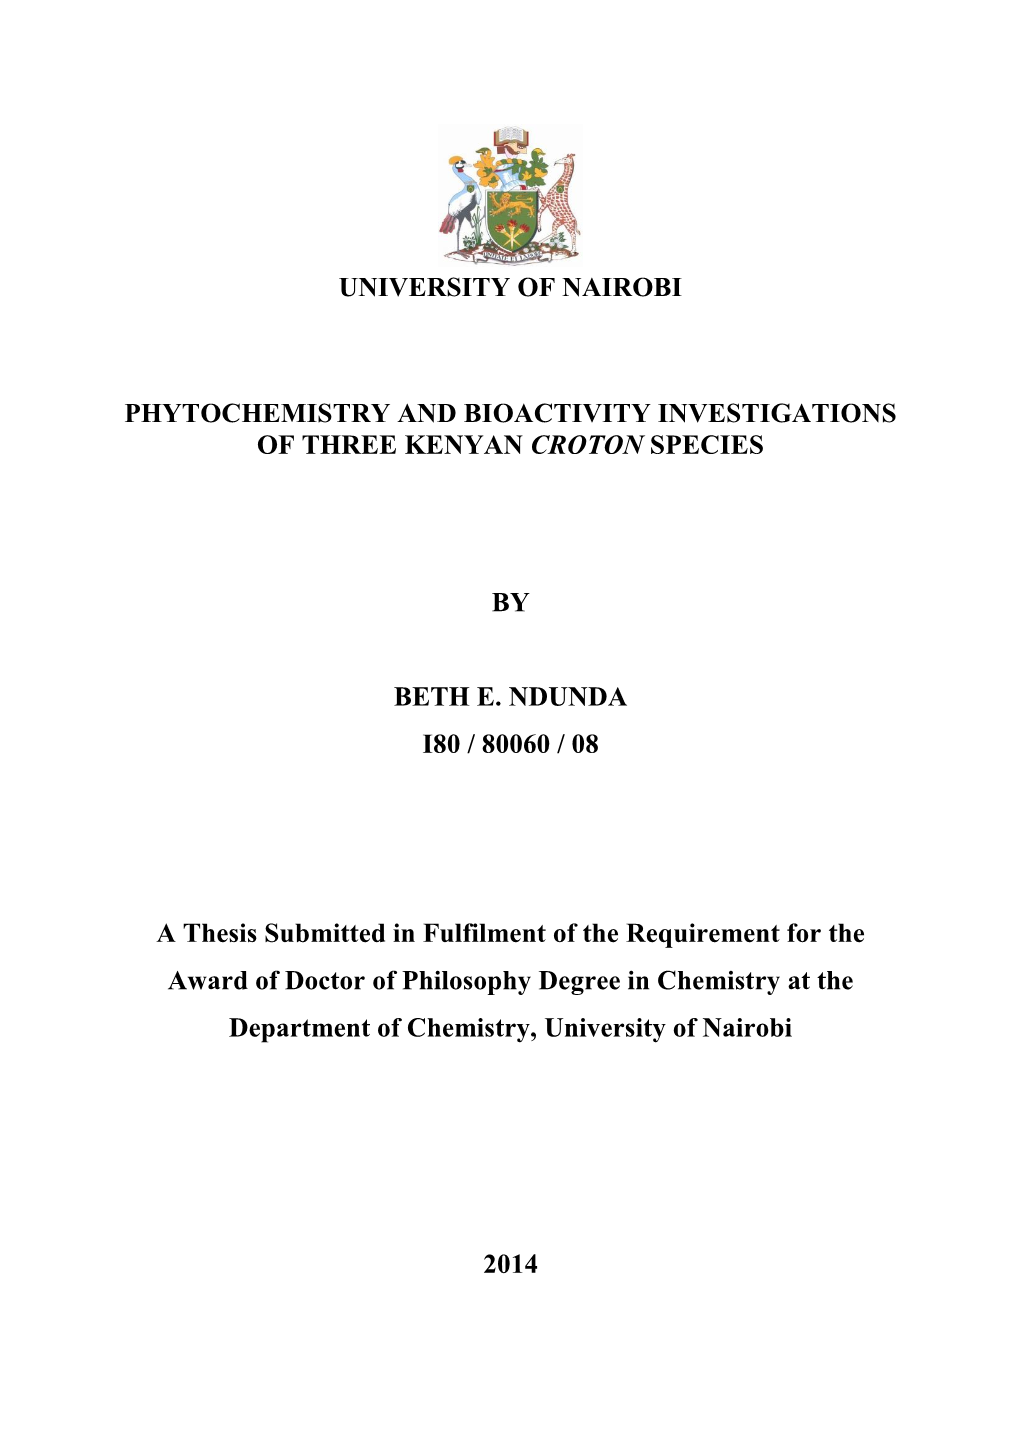 Phytochemistry and Bioactivity Investigations of Three Kenyan Croton Species